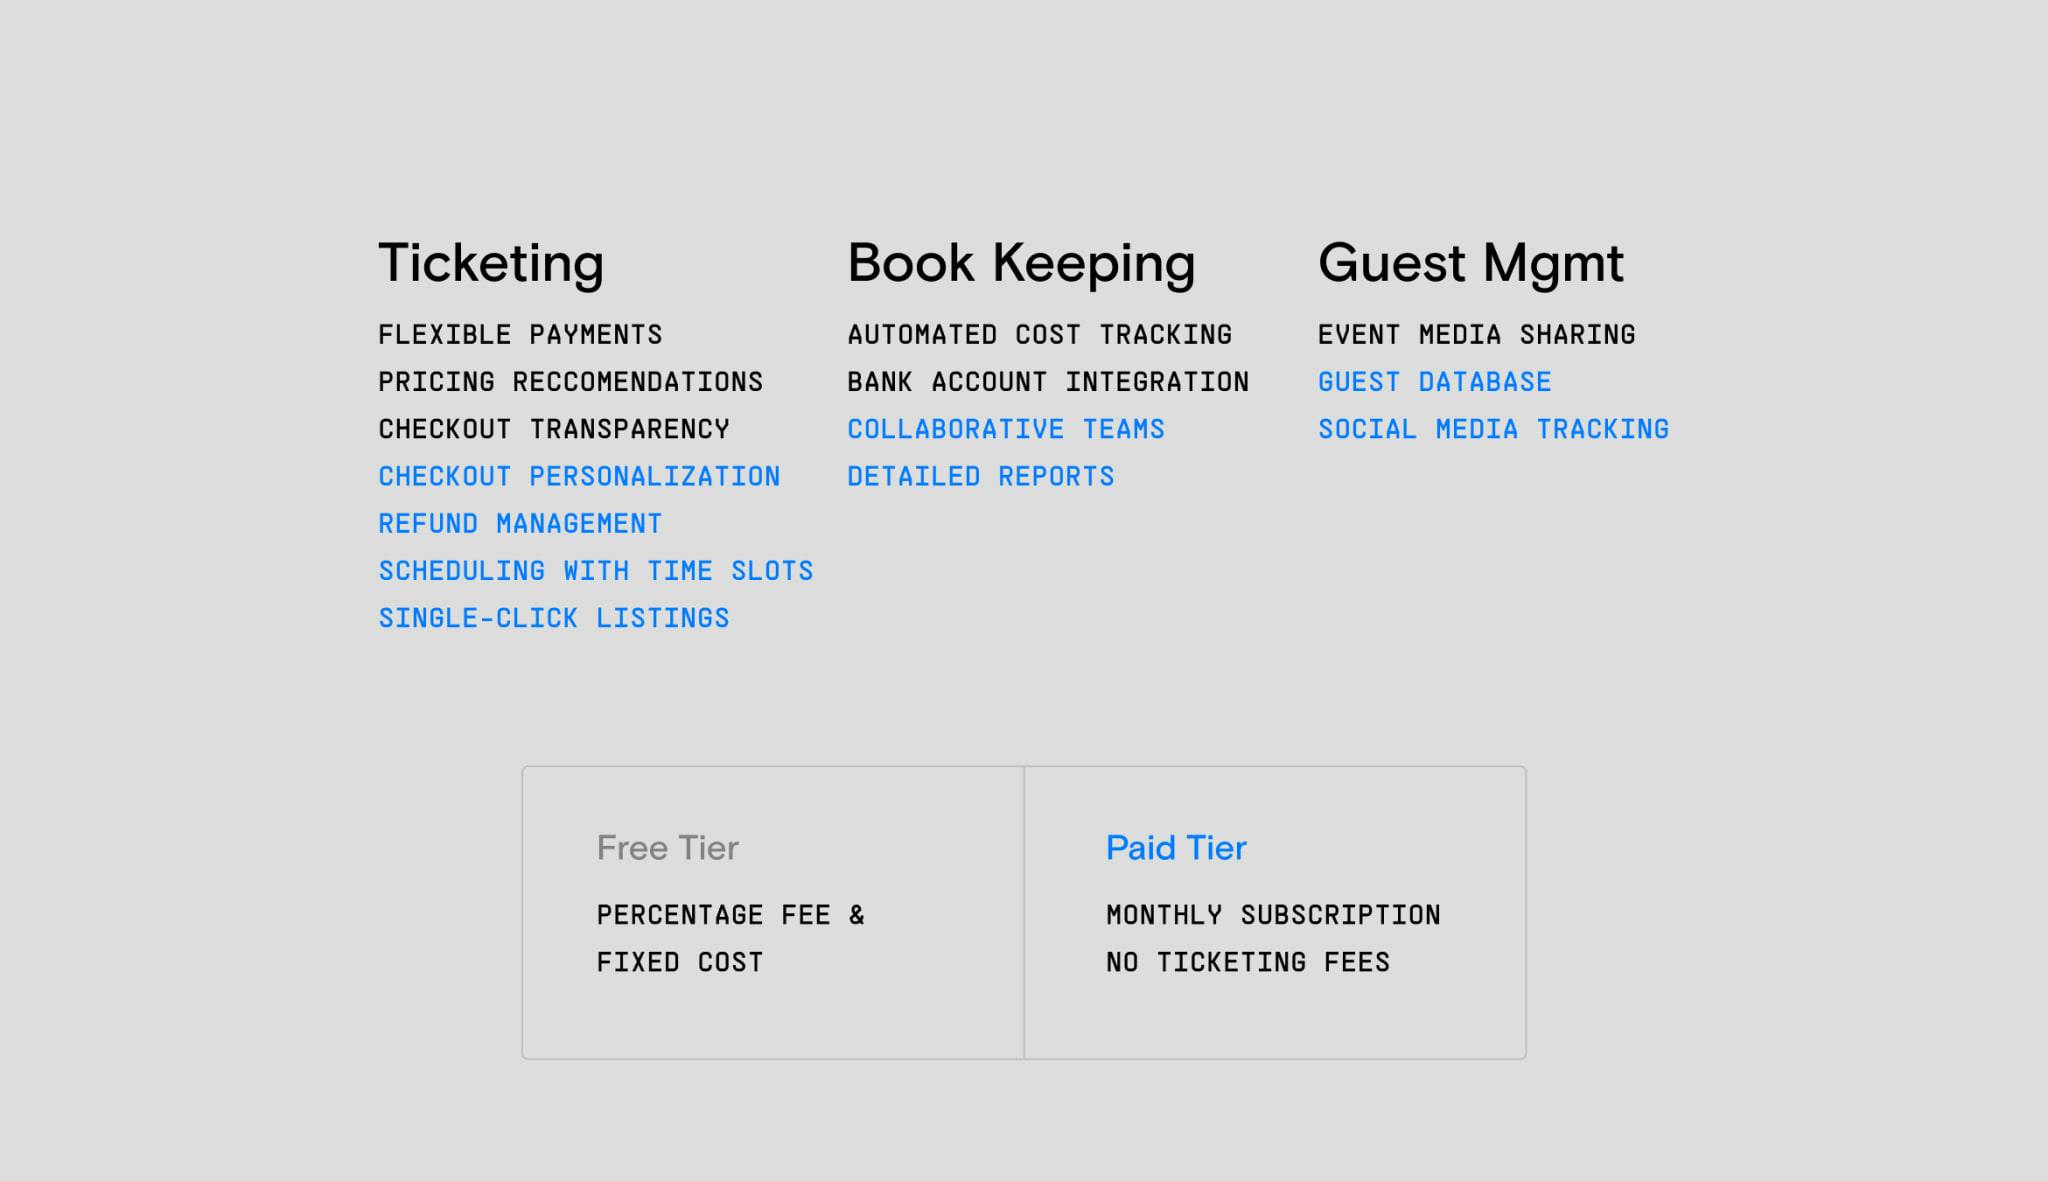 A screenshot of the software feature set: ticketing, book keeping, and guest management